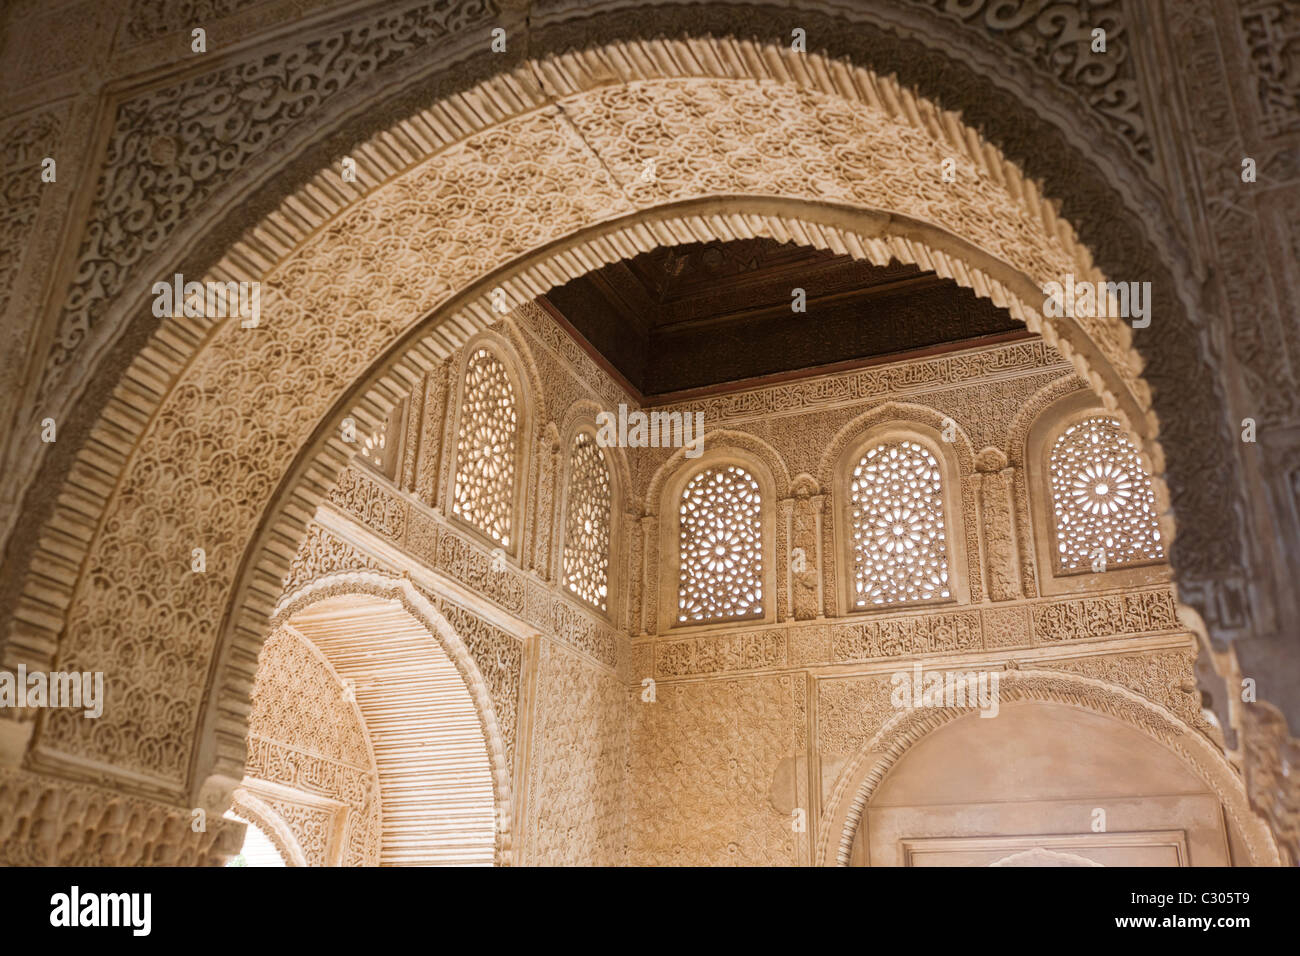 Ornate carving and architecture after conservation work in Court of the Sultana, Alhambra, Granada. Stock Photo